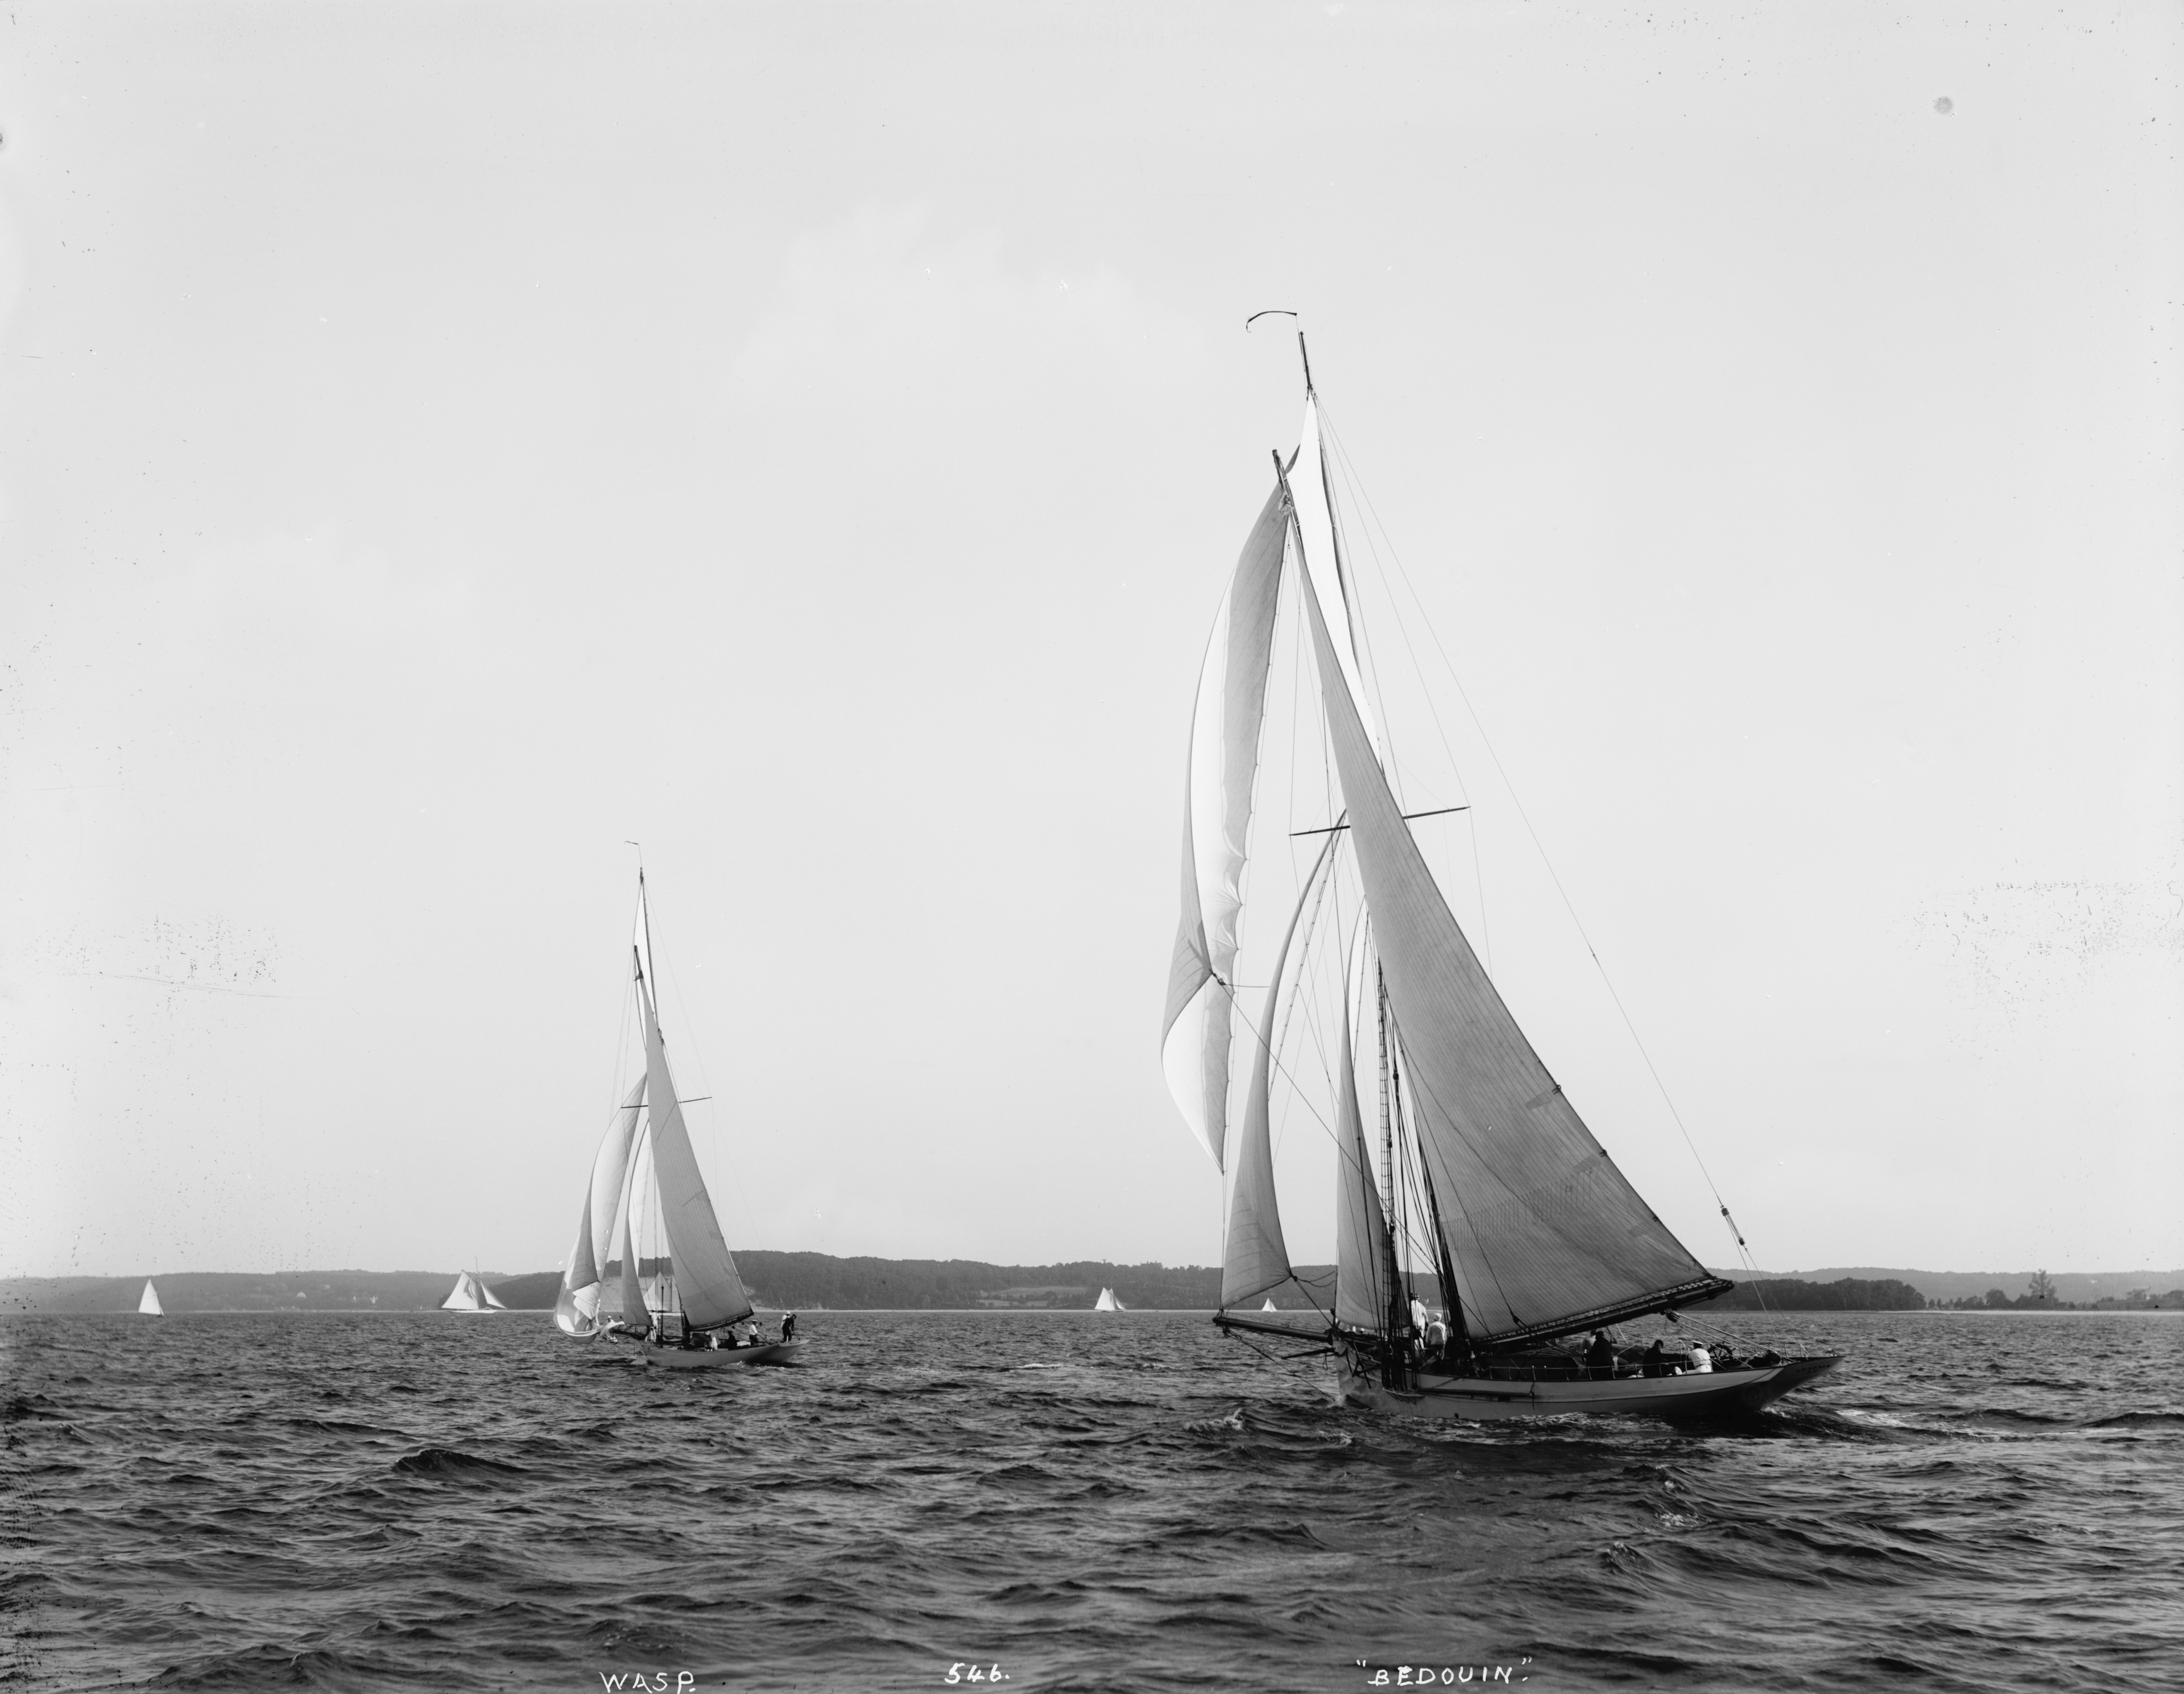 Yachts Wasp & Bedouin